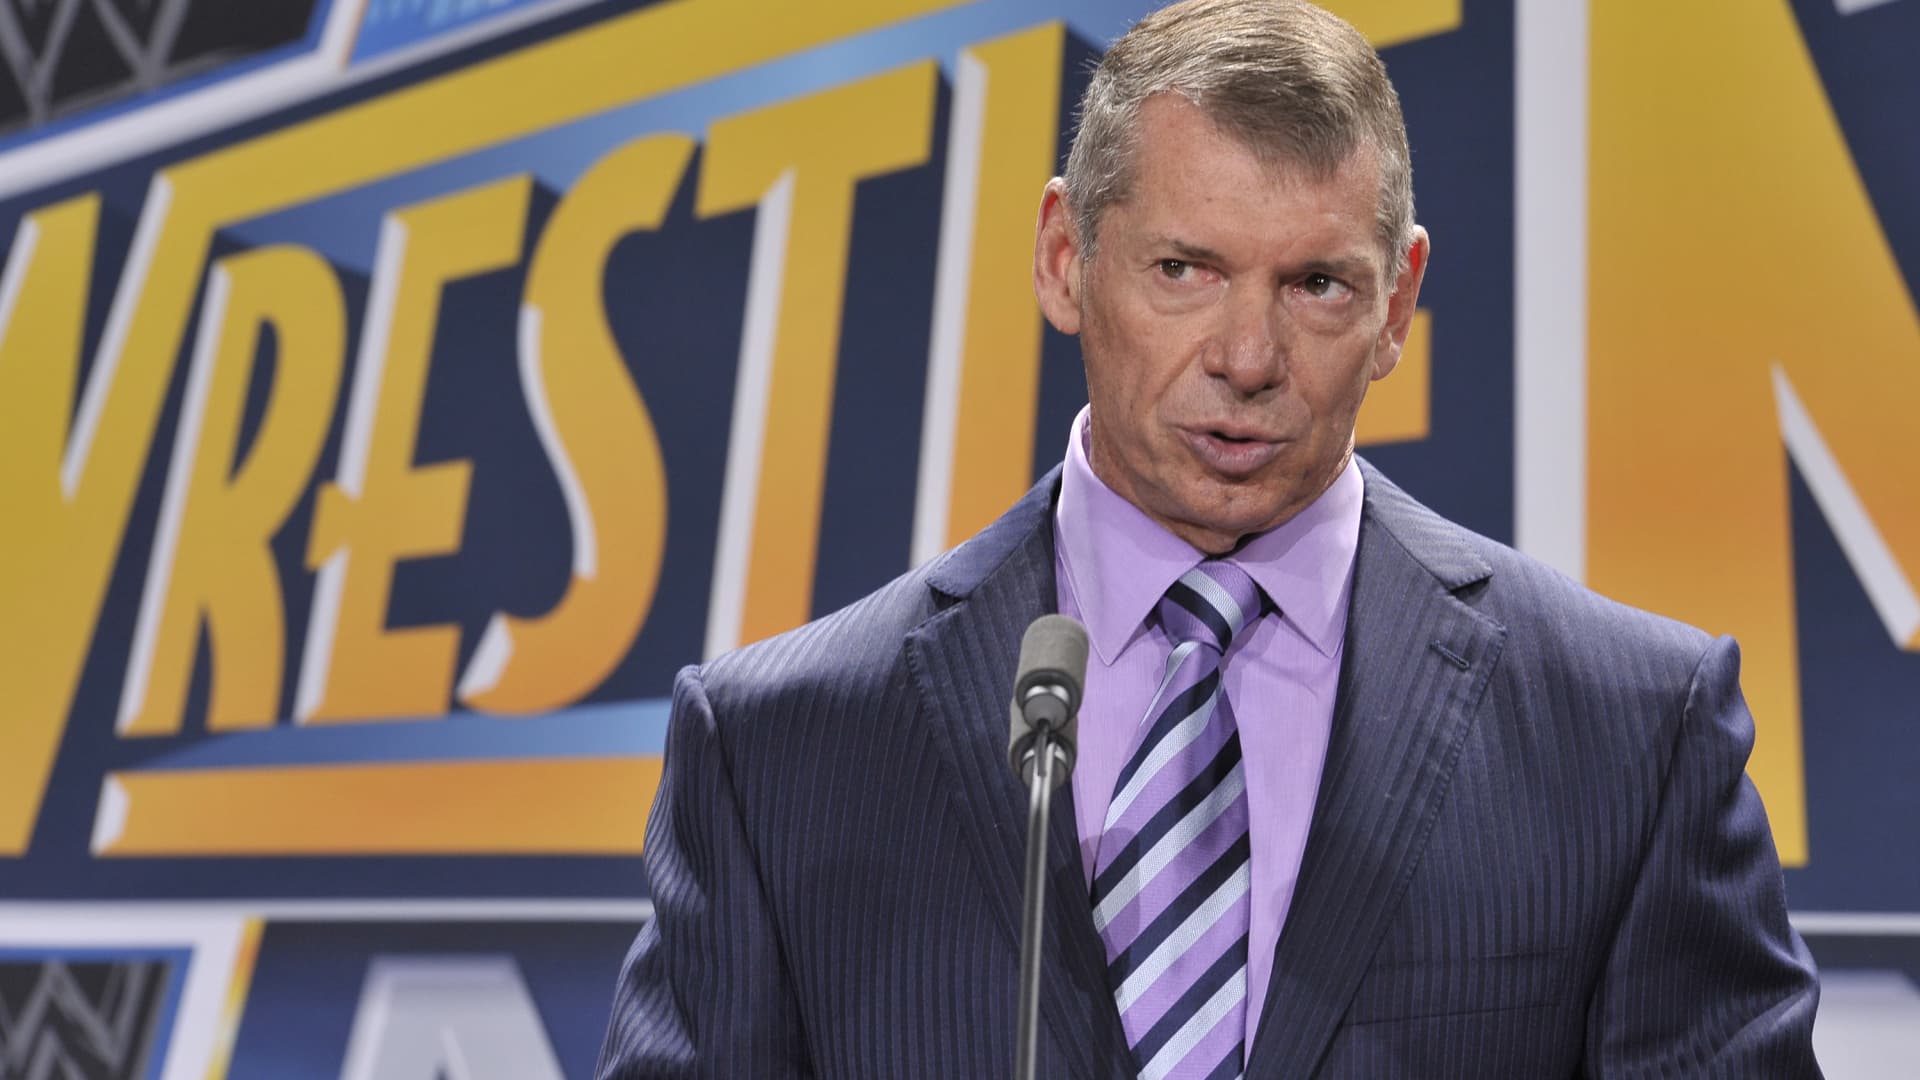 WWE taps Fanatics to sell merchandise at live events like WrestleMania, SummerSlam